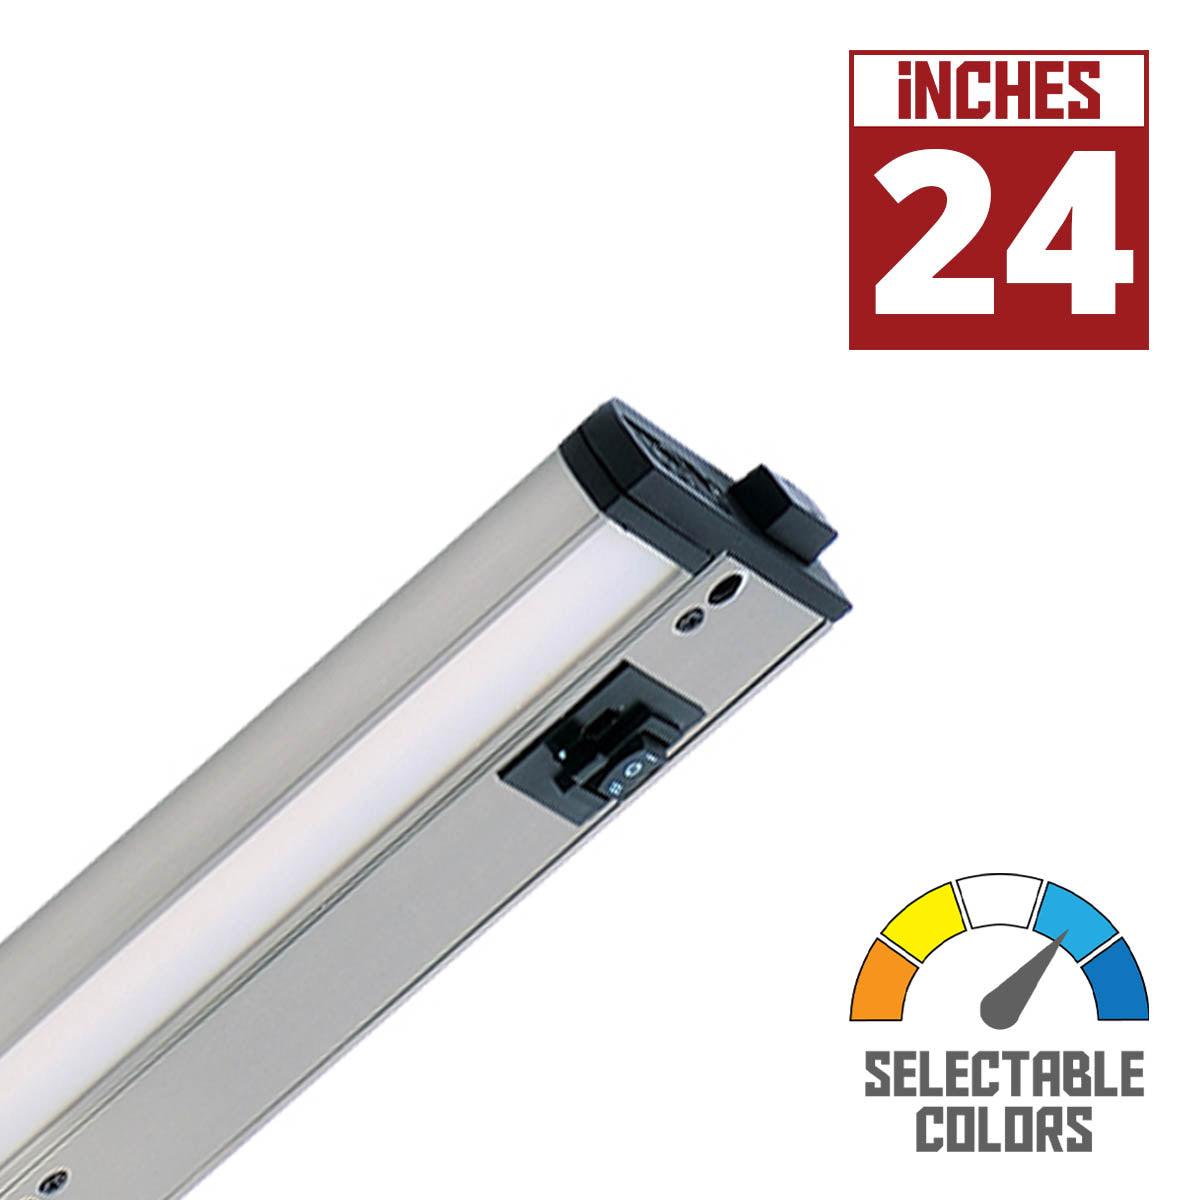 CounterMax 5K 24 Inch Under Cabinet LED Light with Patent gimbals, 1560 Lumens, Linkable, CCT Selectable 2700K to 5000K, 120V